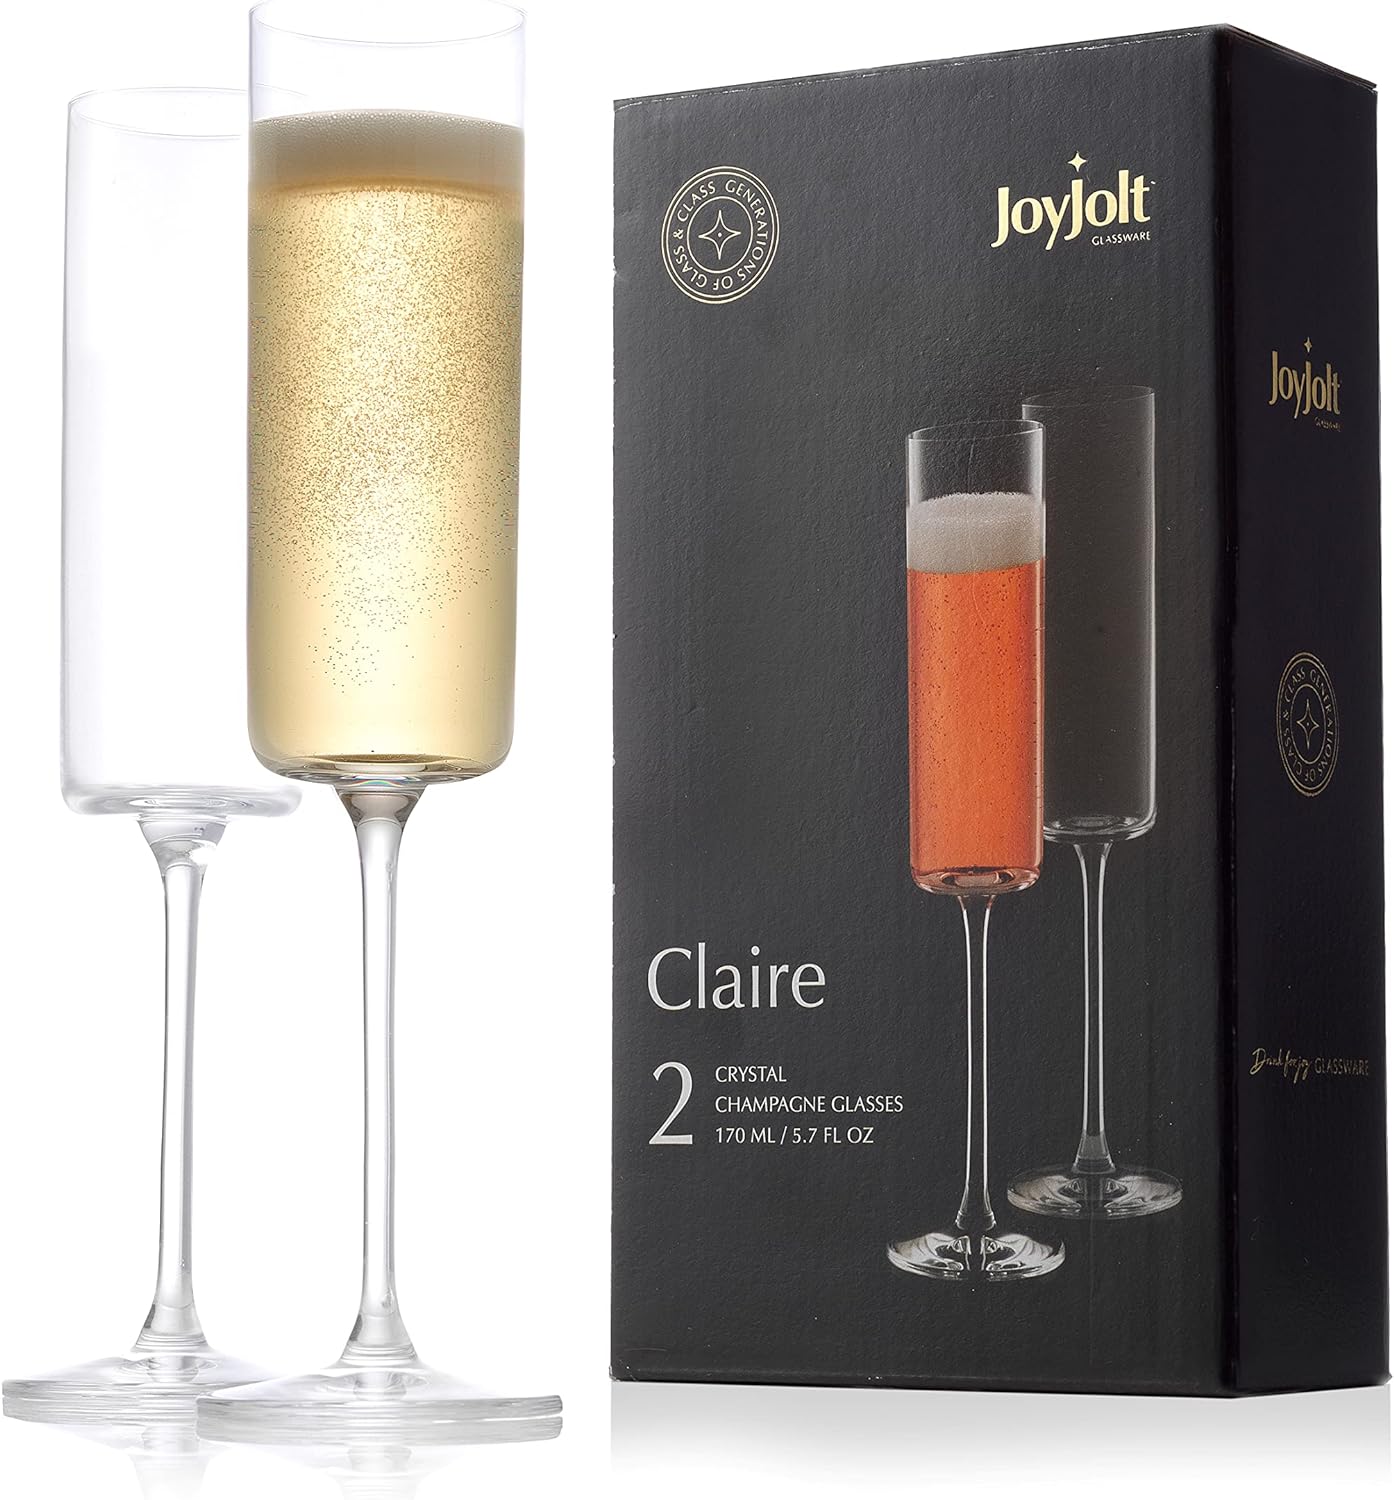 JoyJolt Champagne Flutes – Claire Collection Crystal Champagne Glasses